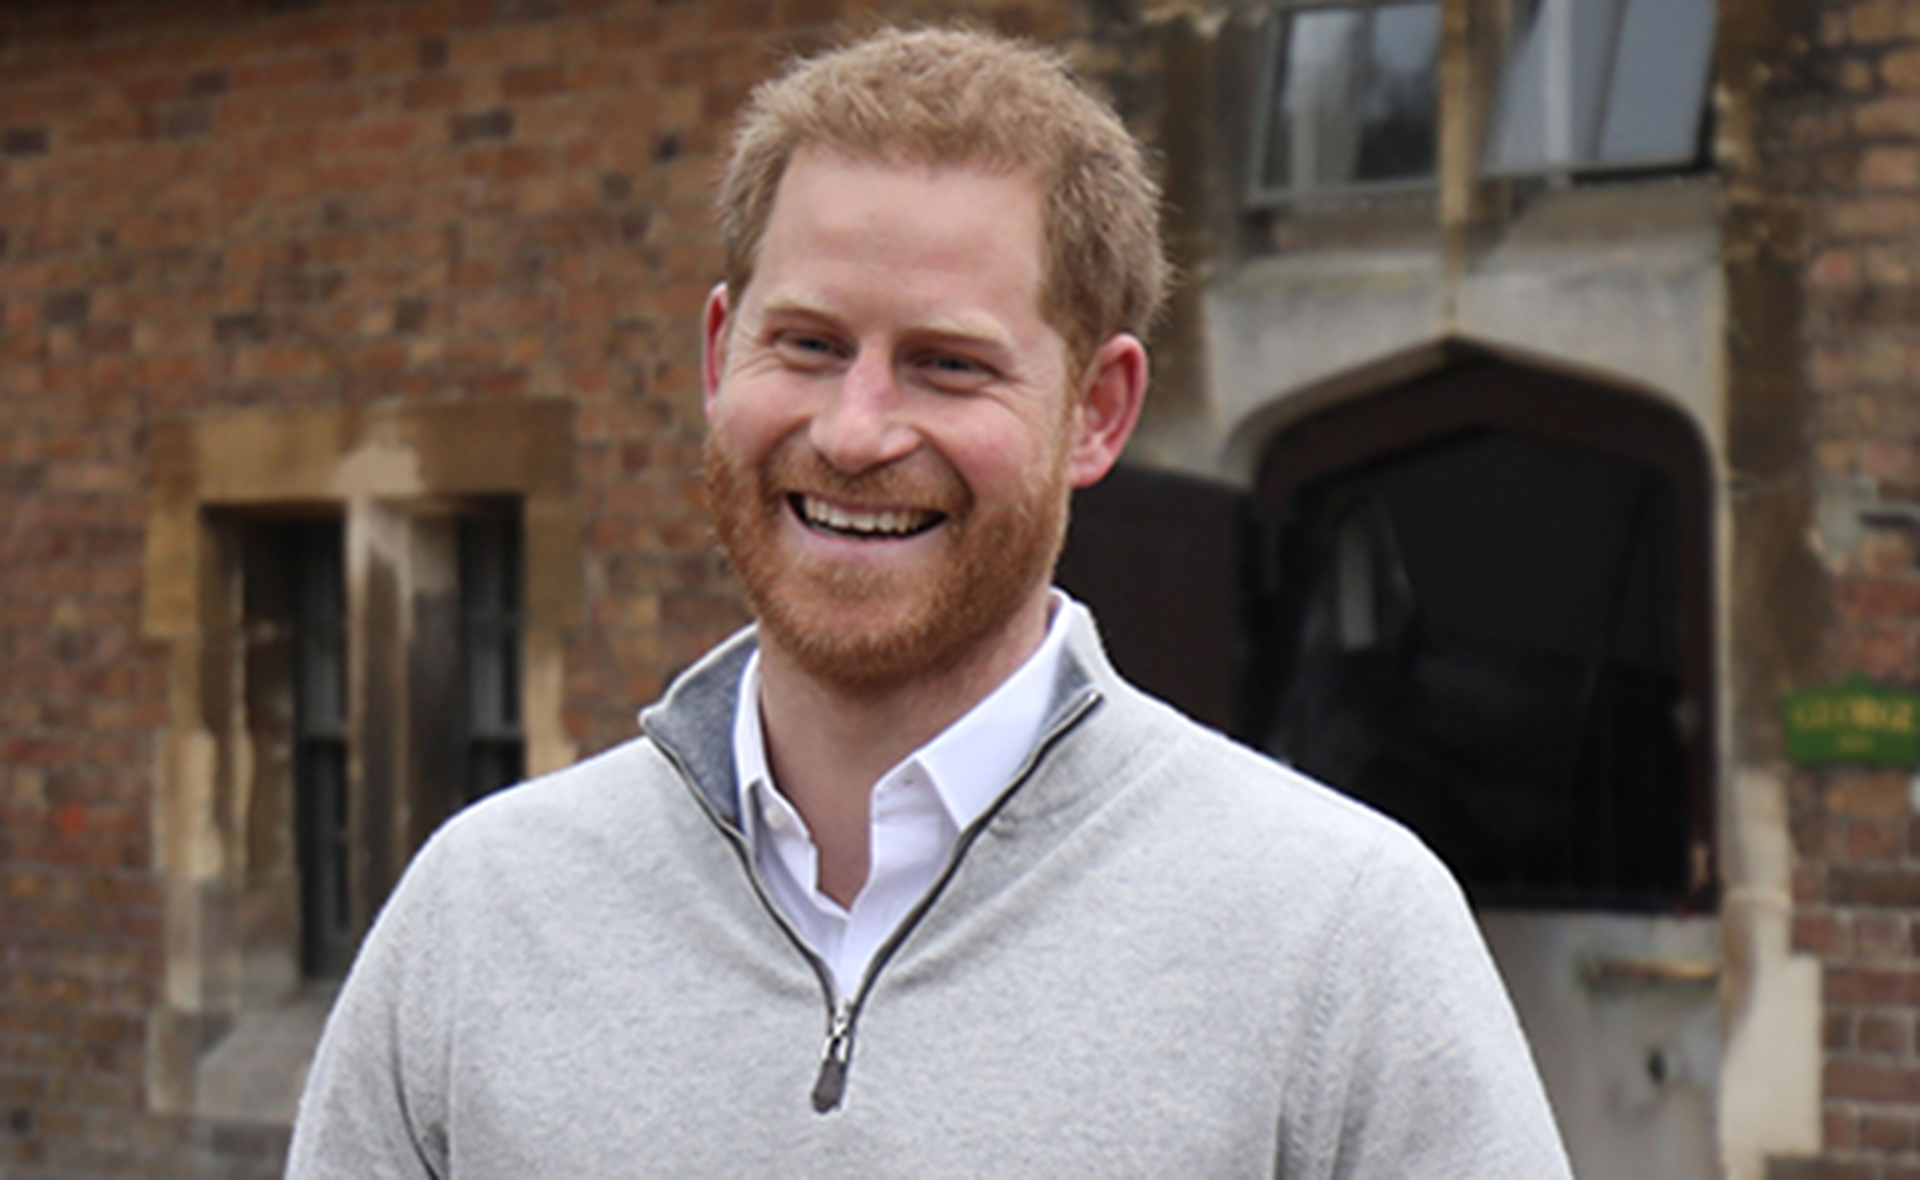 Prince Harry announces his “intimate and heartfelt” memoir about royalty, his personal life and fatherhood